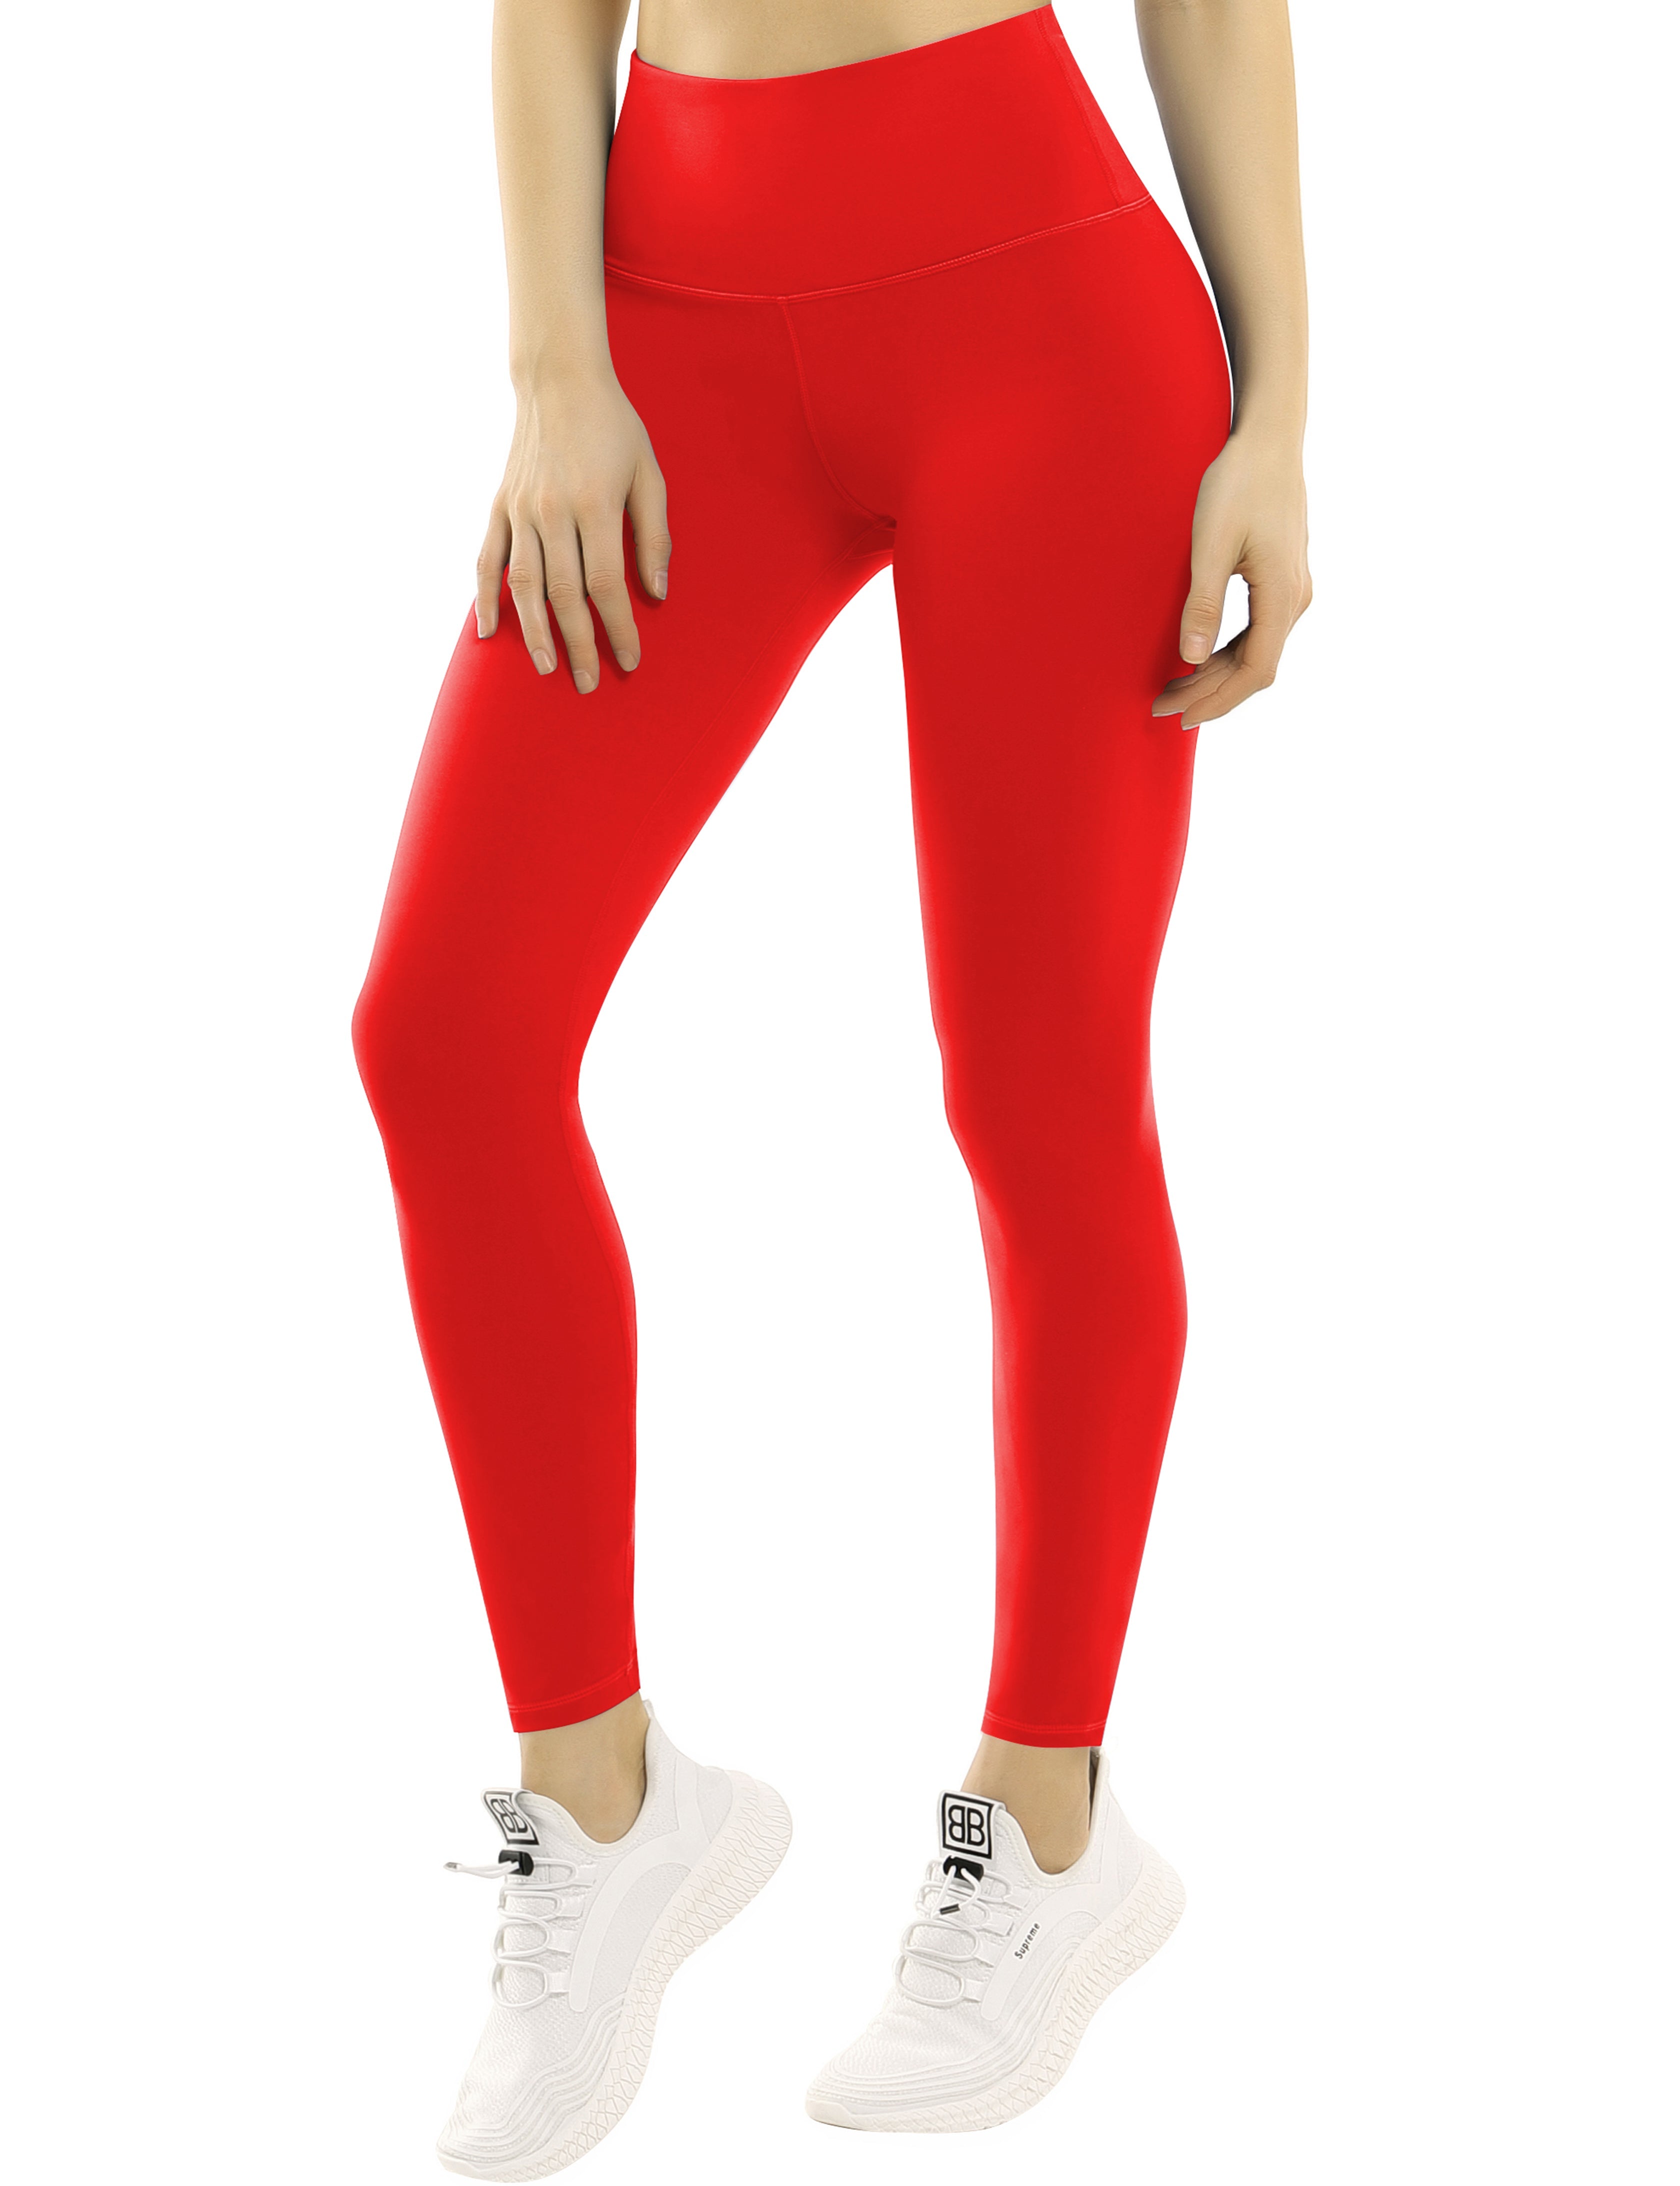 High Waist Gym Pants scarlet 75%Nylon/25%Spandex Fabric doesn't attract lint easily 4-way stretch No see-through Moisture-wicking Tummy control Inner pocket Four lengths